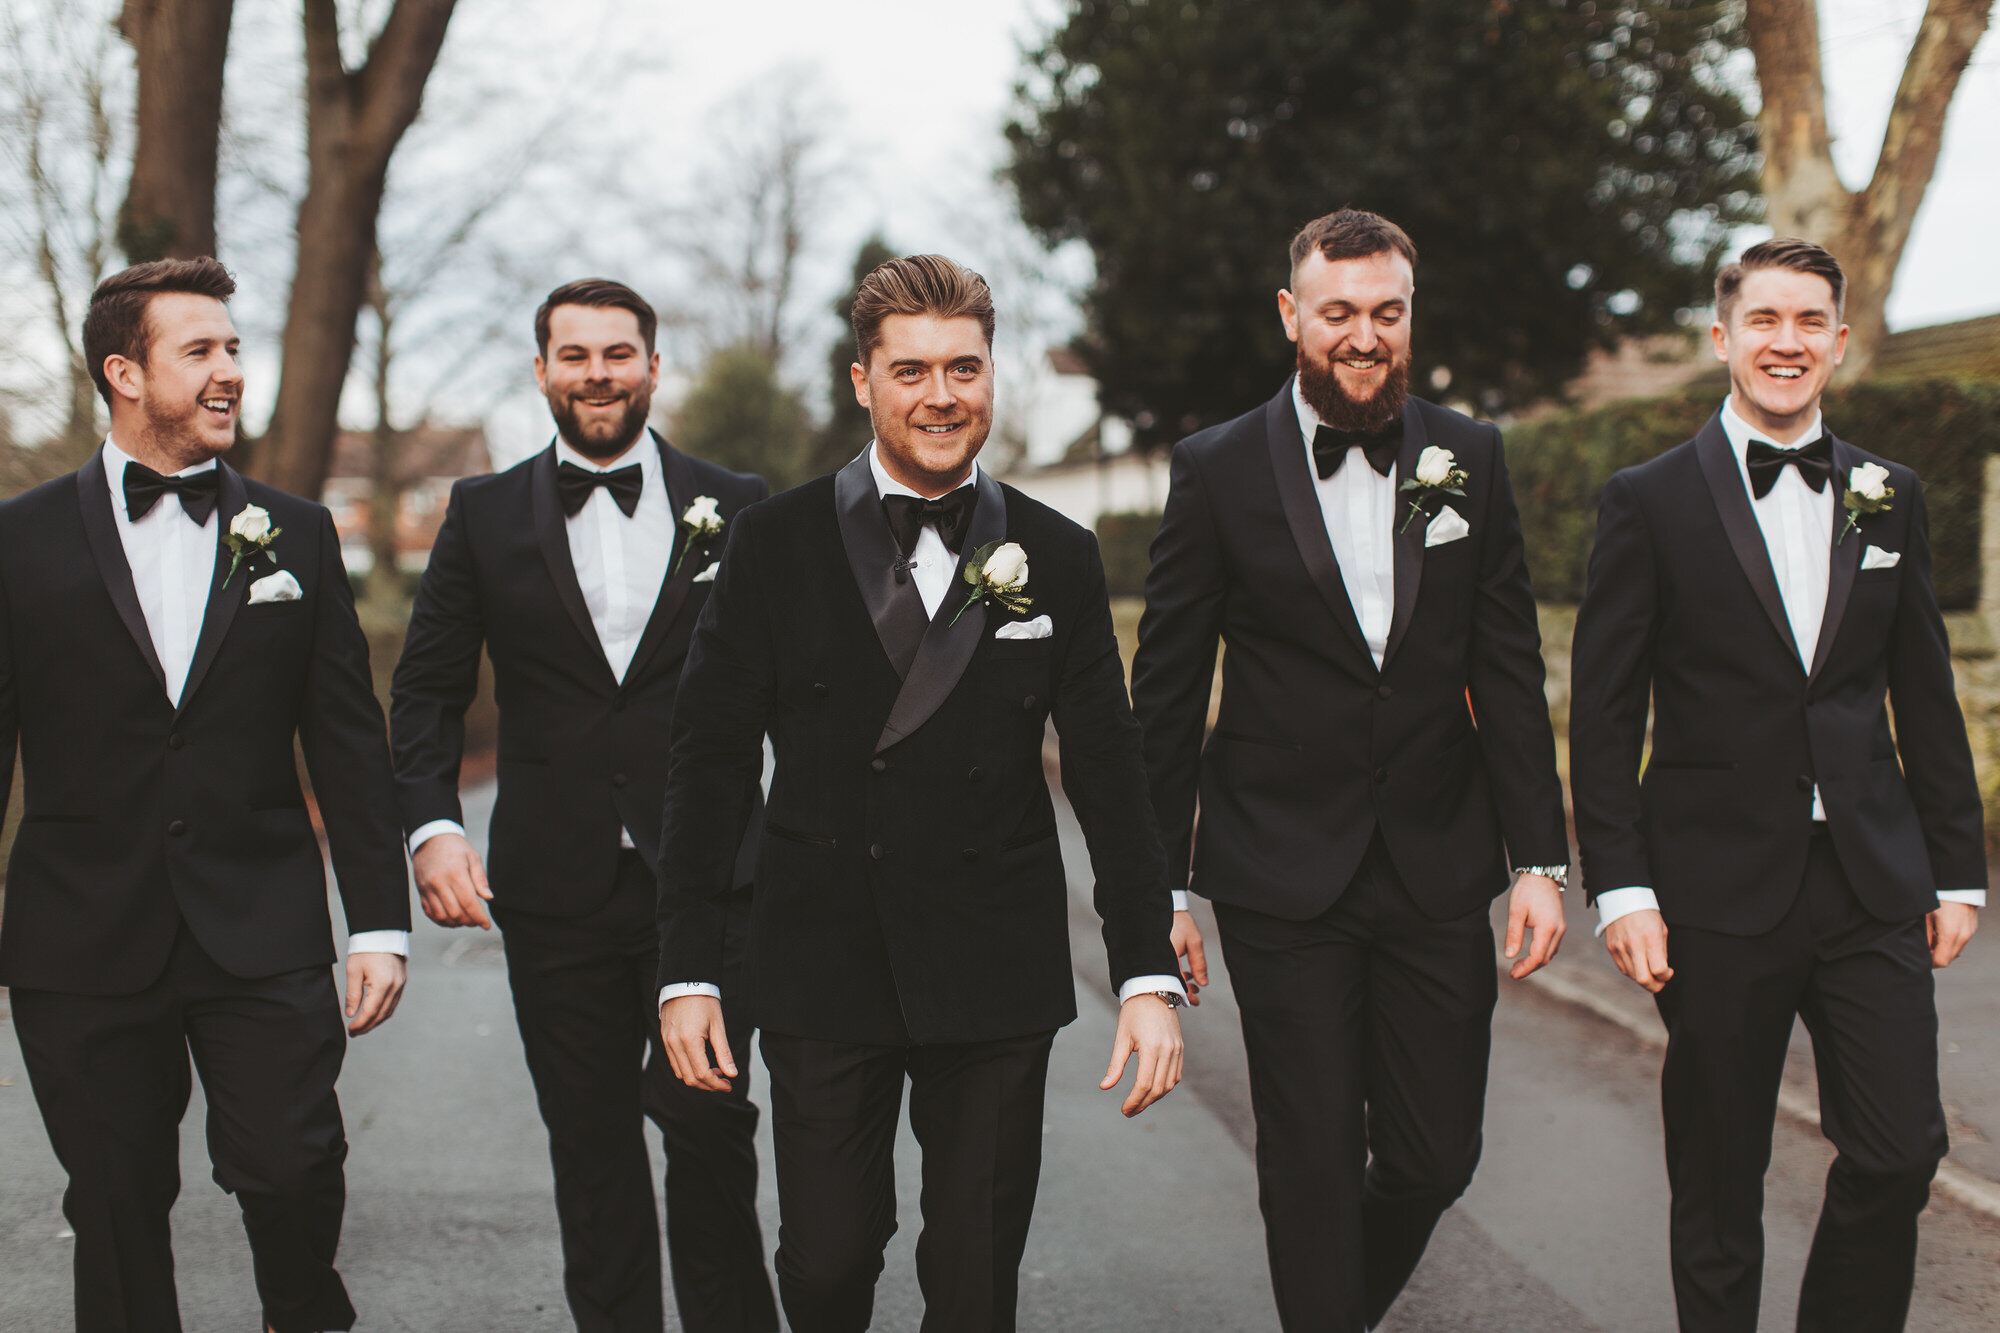 bawtry hall wedding photographers in doncaster7.jpg